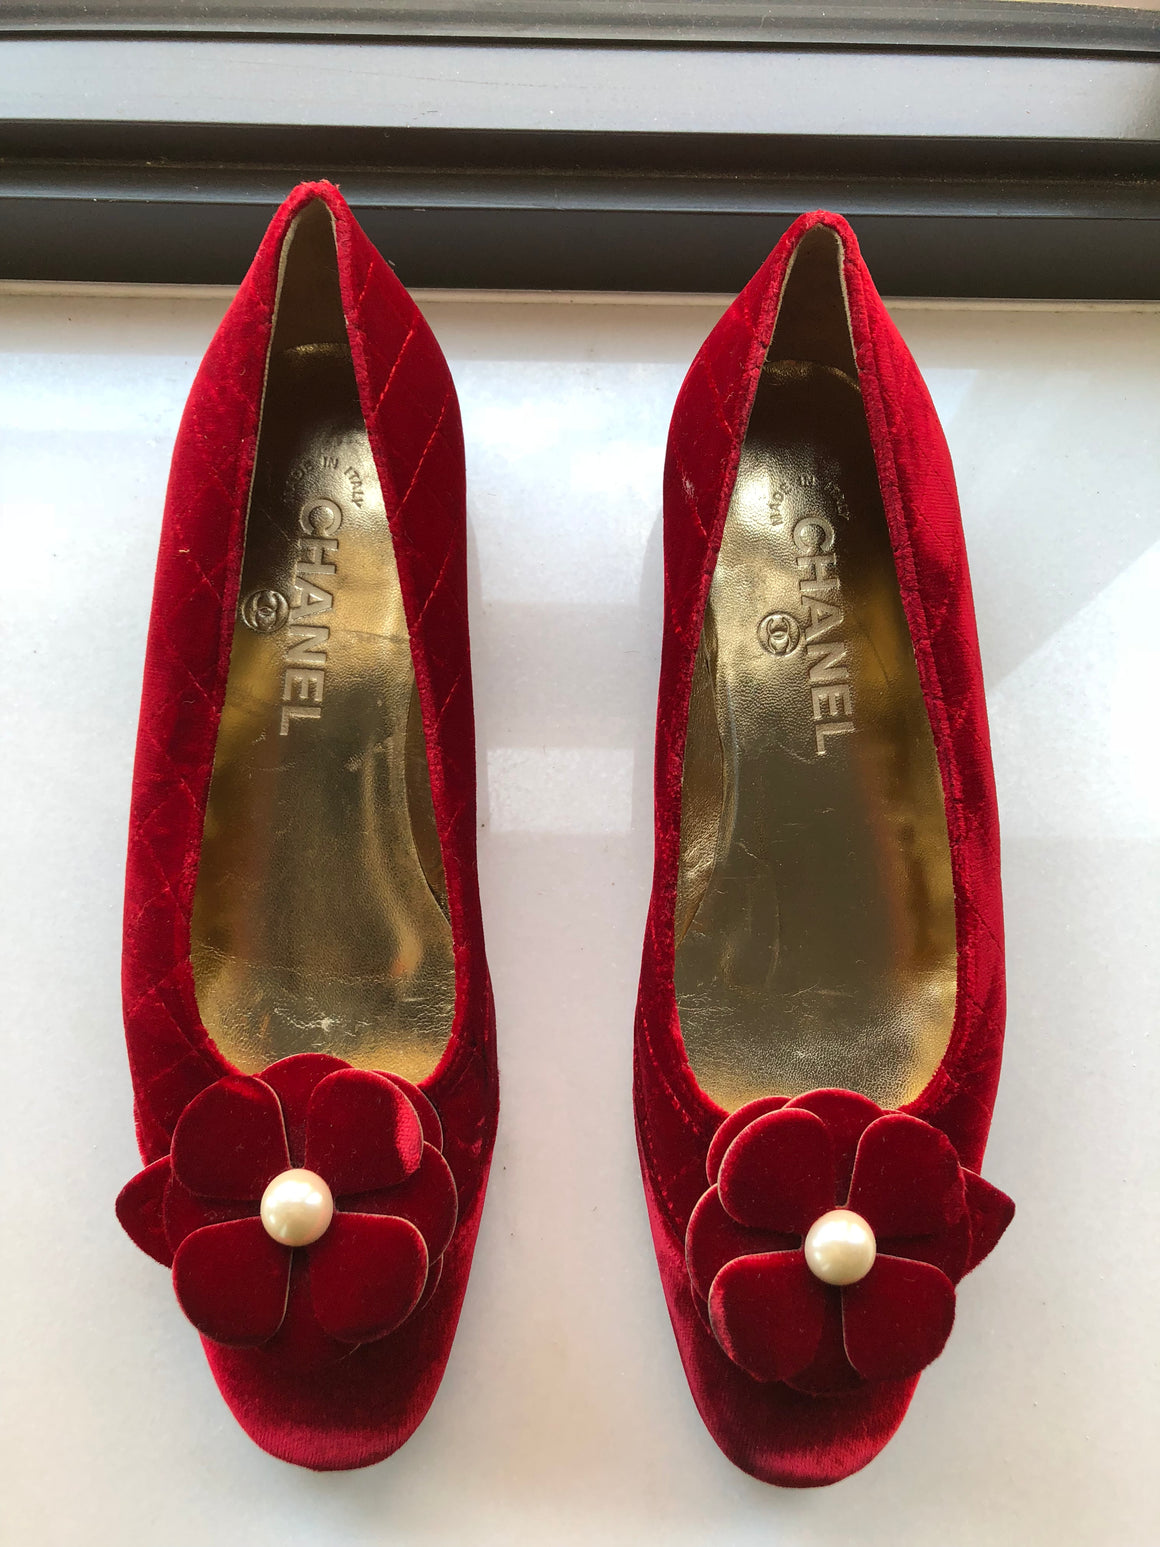 Vintage Chanel Shoes!-New Neu Glamour | Preloved Designer Jewelry, Shoes &amp; Handbags.